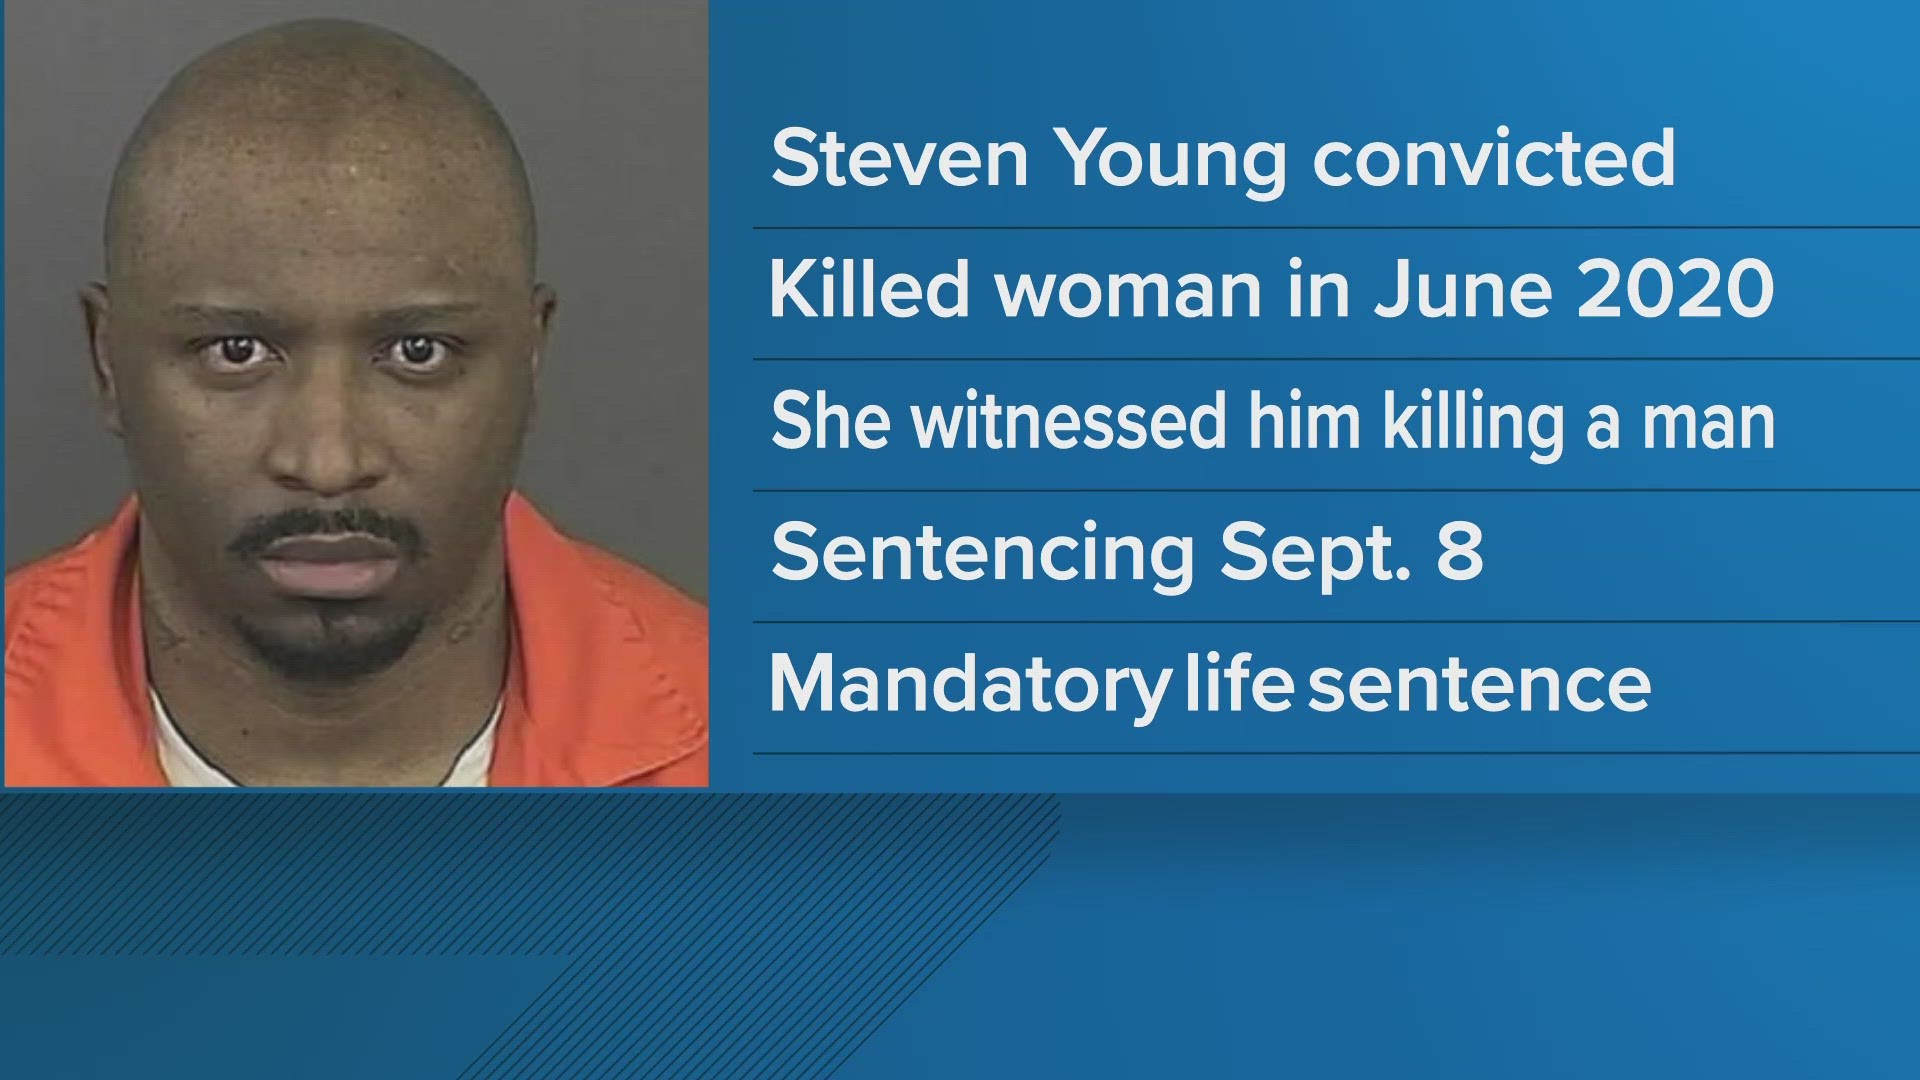 Steven Young has now been convicted of first-degree murder for homicides in Denver and Aurora.